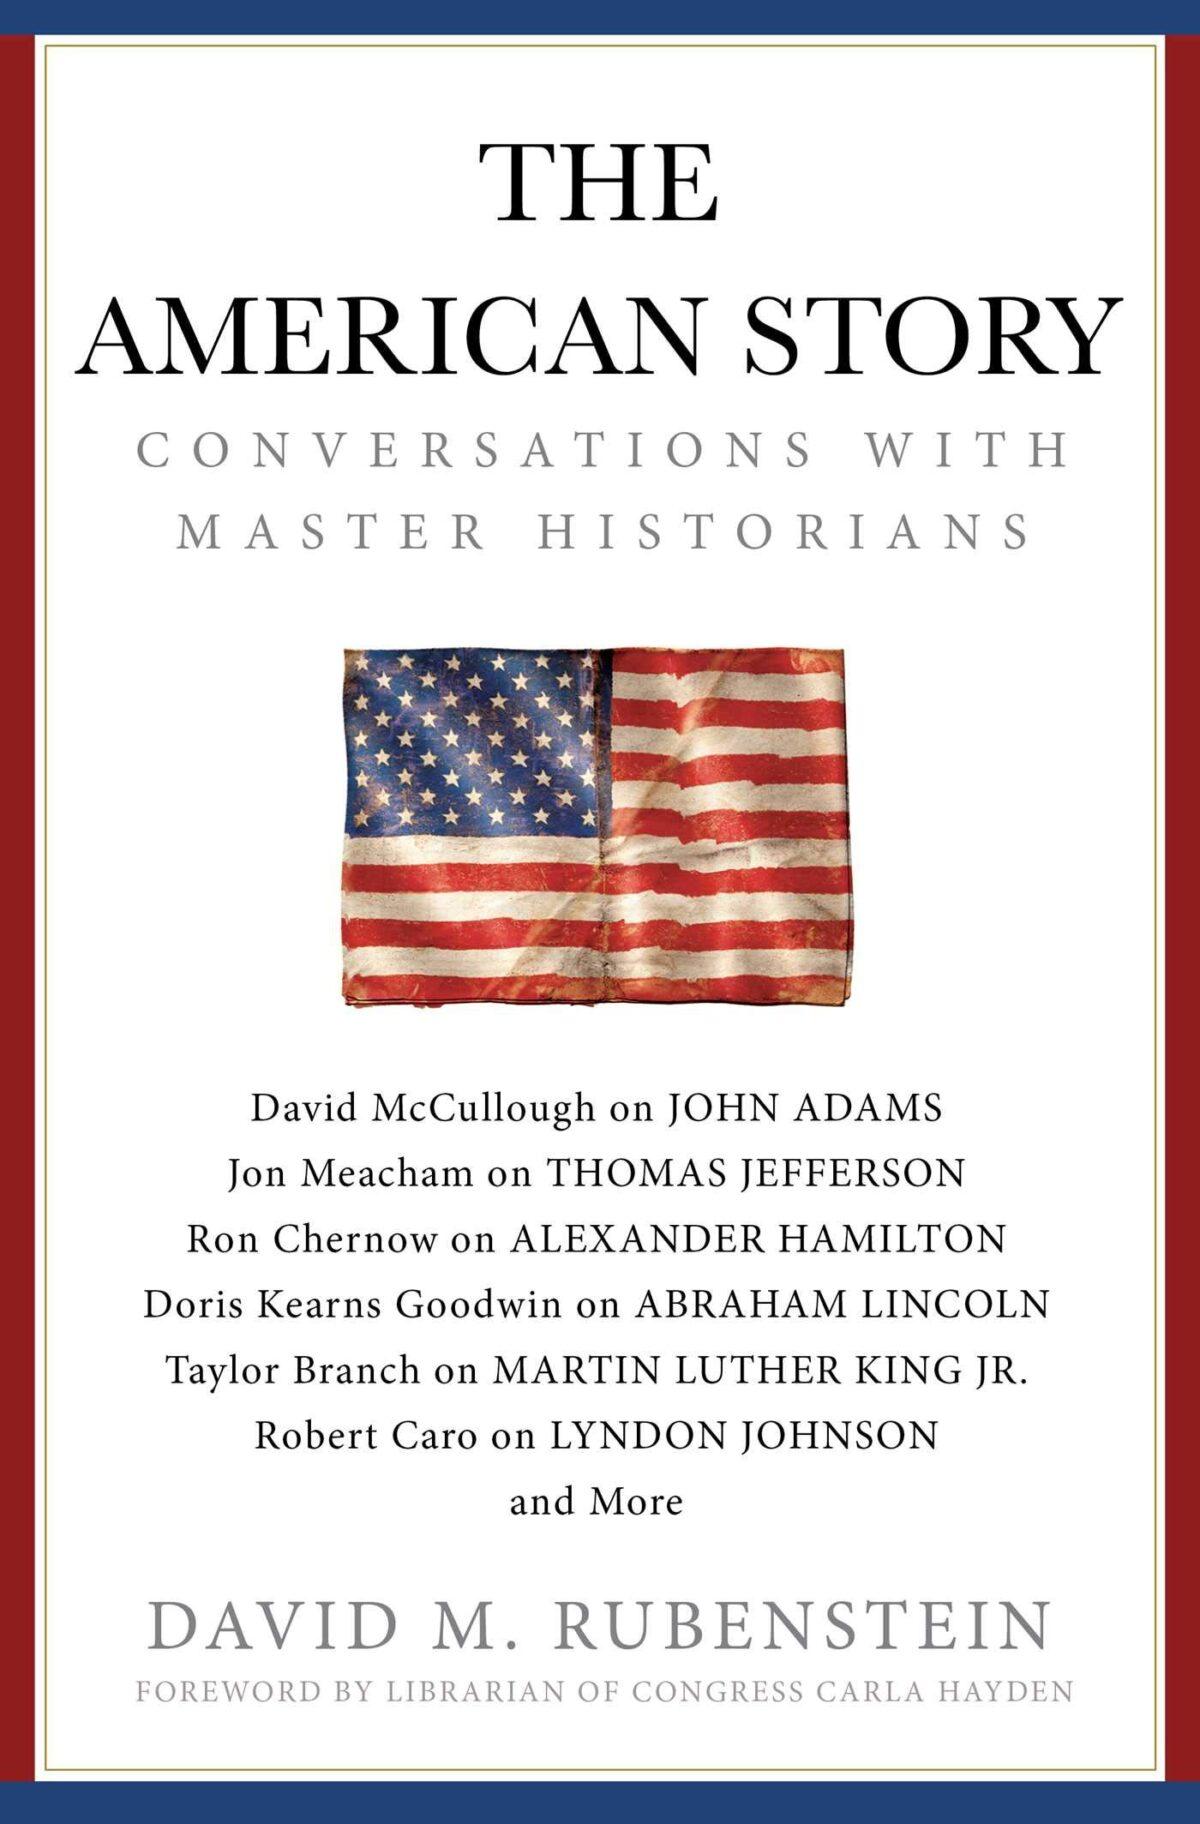 The cover of "American Story: Conversations With Master Historians."